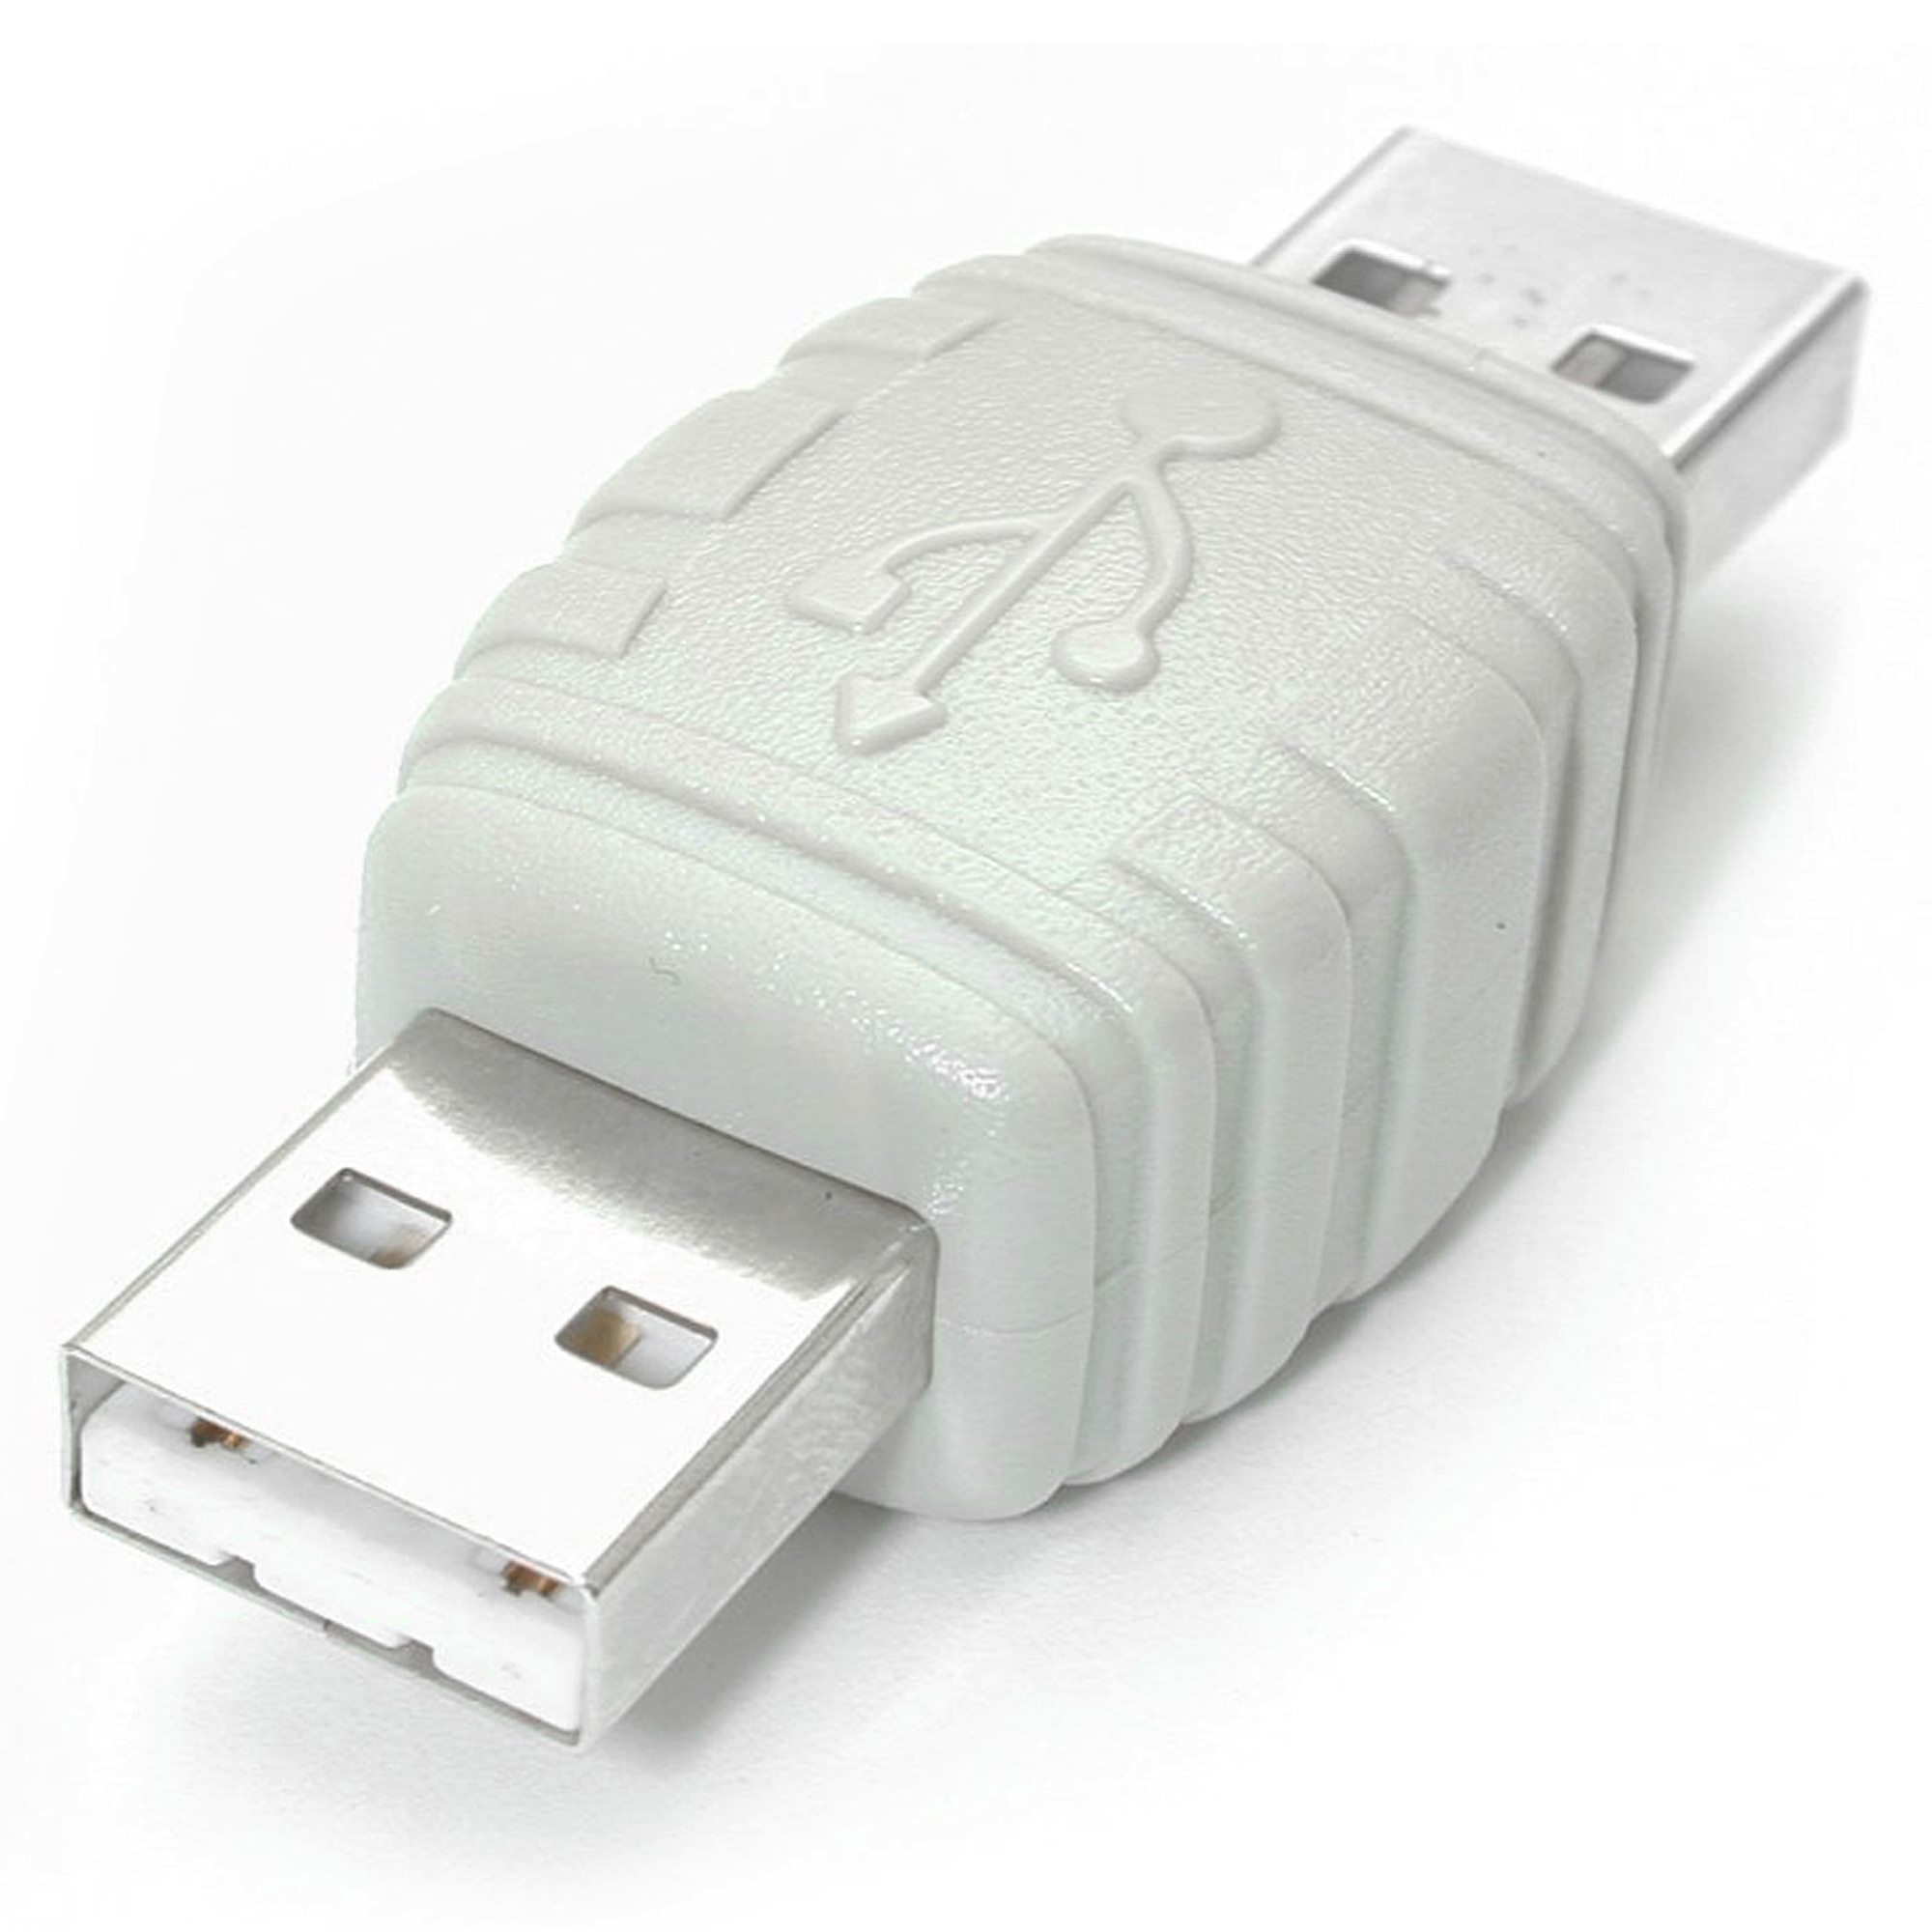 natuurlijk lobby formule USB A to USB A Cable Adapter M/M - USB Adapters (USB 2.0) | StarTech.com